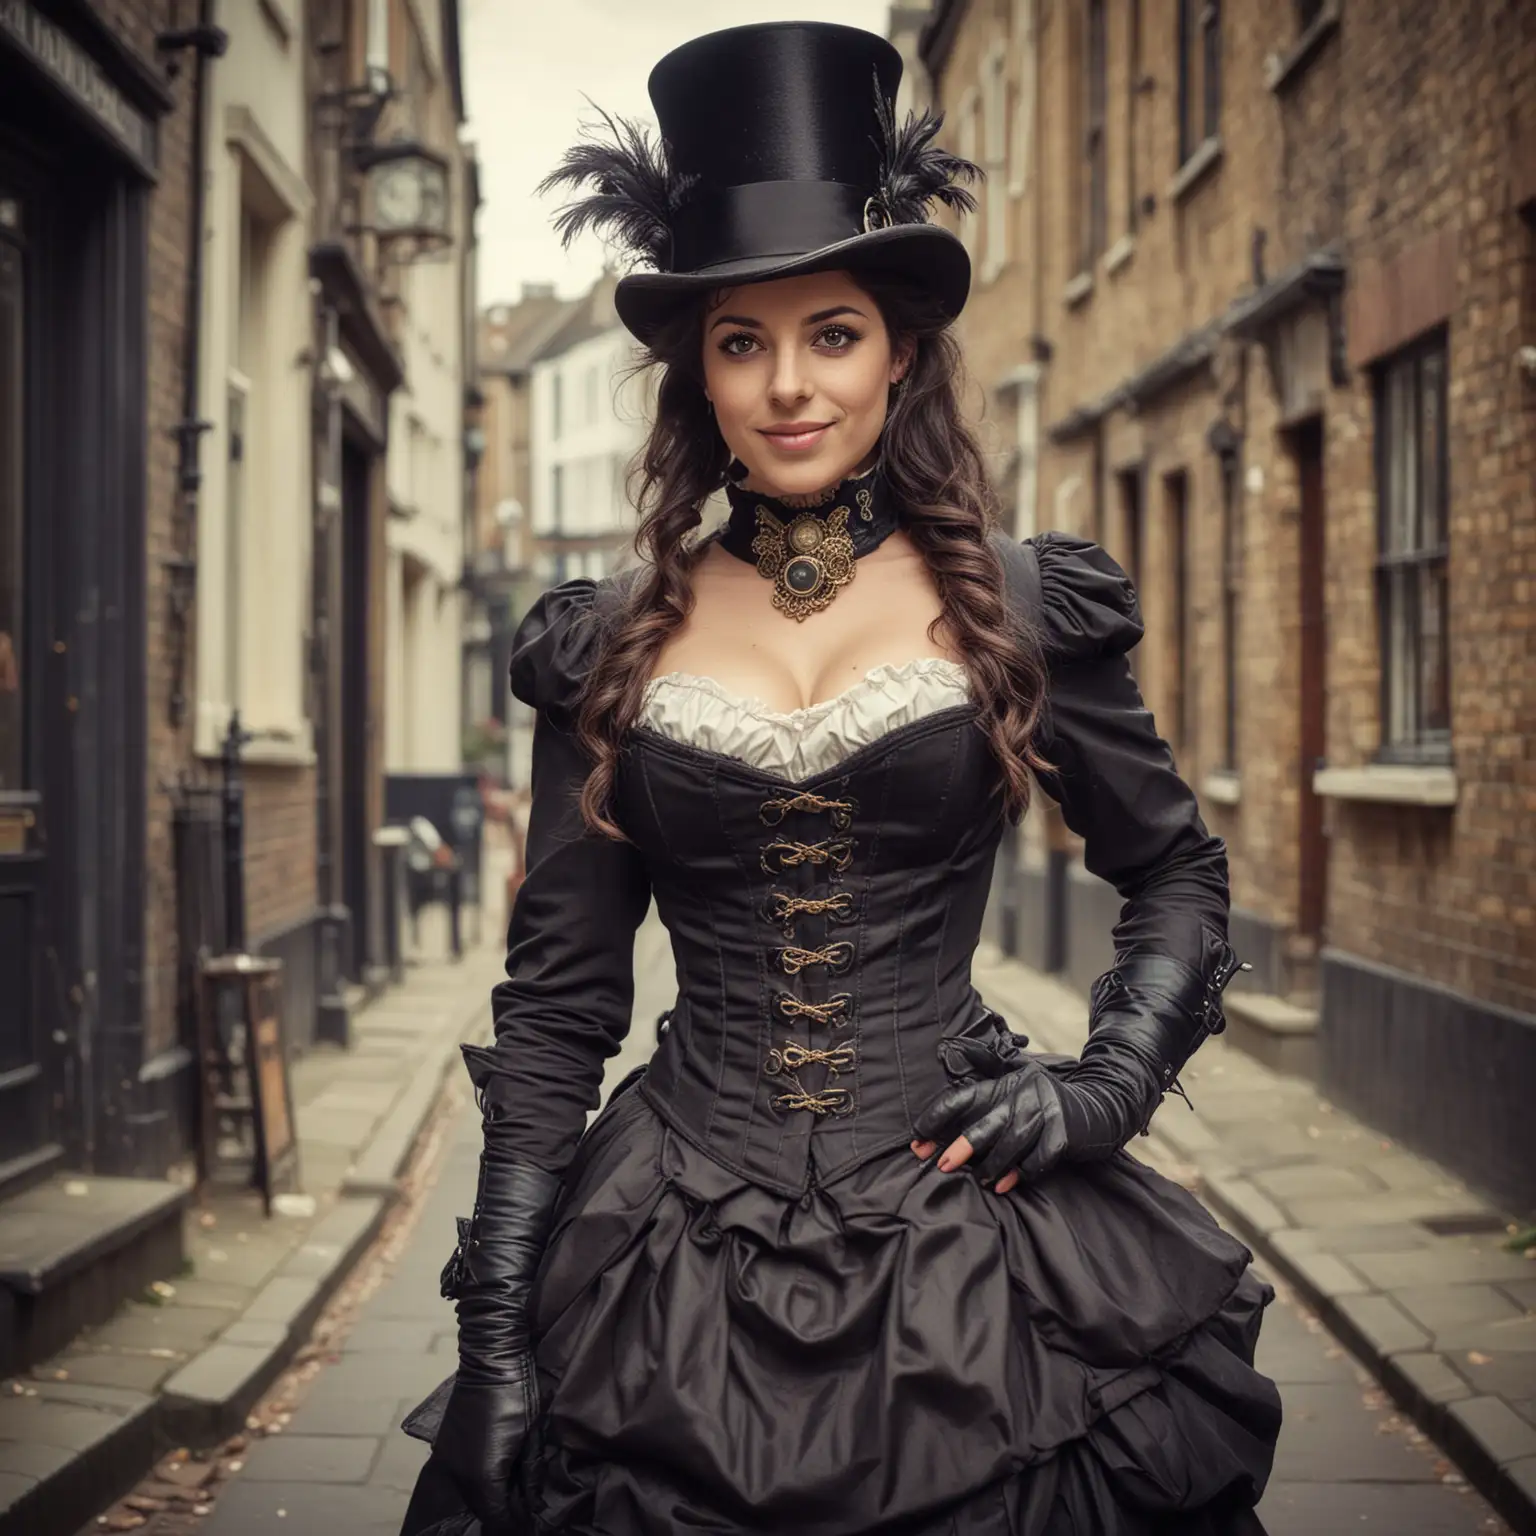 Full length picture of a 38 year old Steampunk Victorian gentlewoman, dark hair and eyes, Italian face, plumptious figure, wearing top hat, corset, skirts and small bustle in the streets of steampunk London. She looks confident with a wry smile 